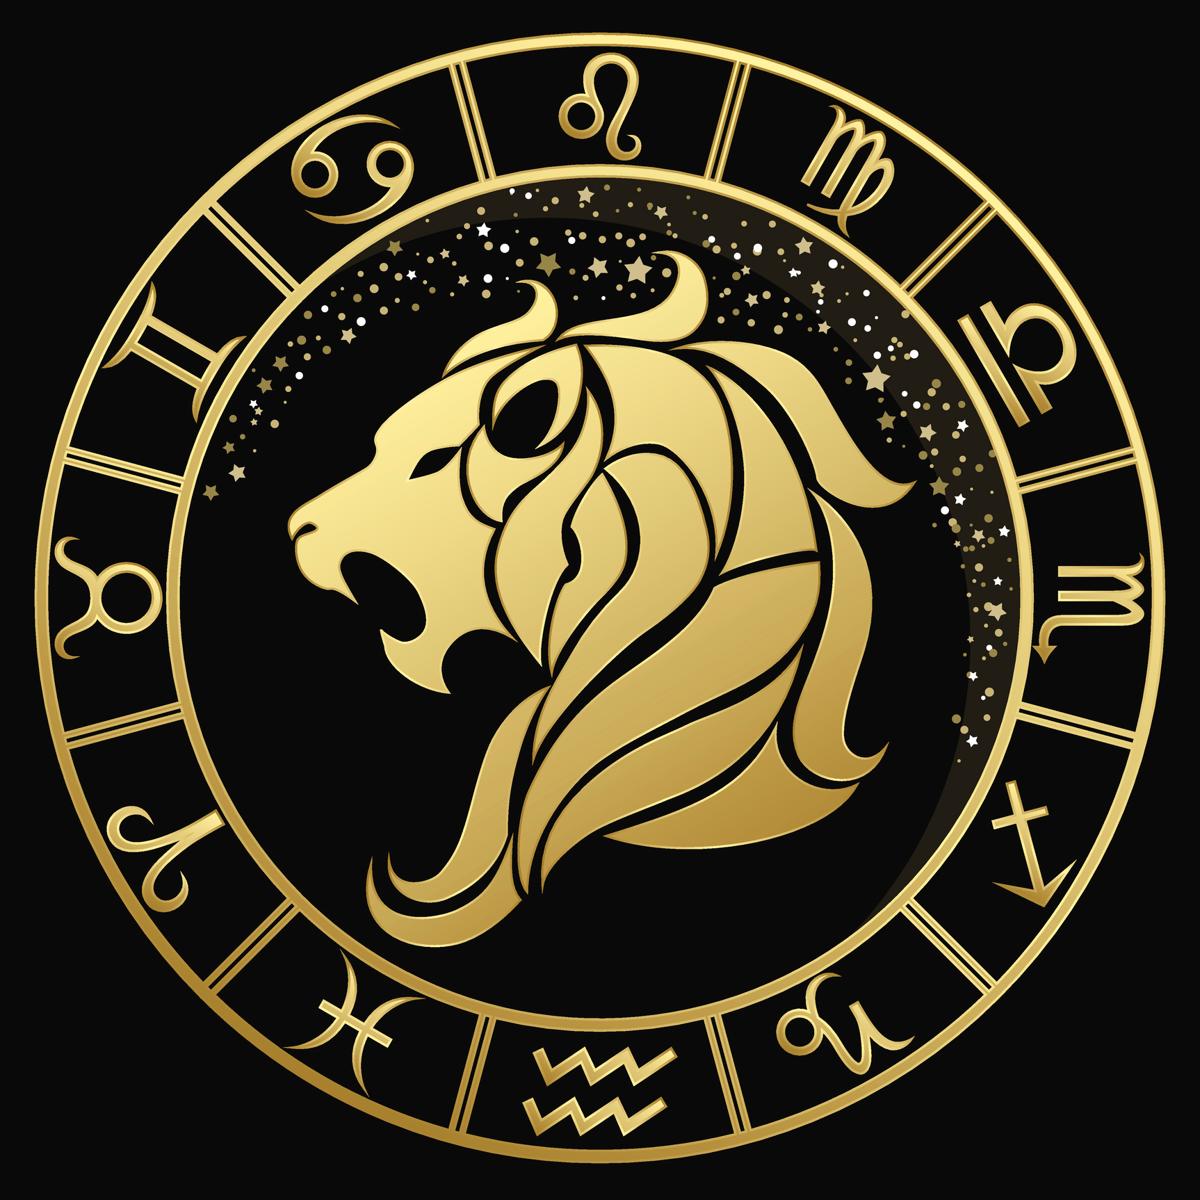 Top 95+ Pictures Pictures Of The Leo Zodiac Sign Full HD, 2k, 4k